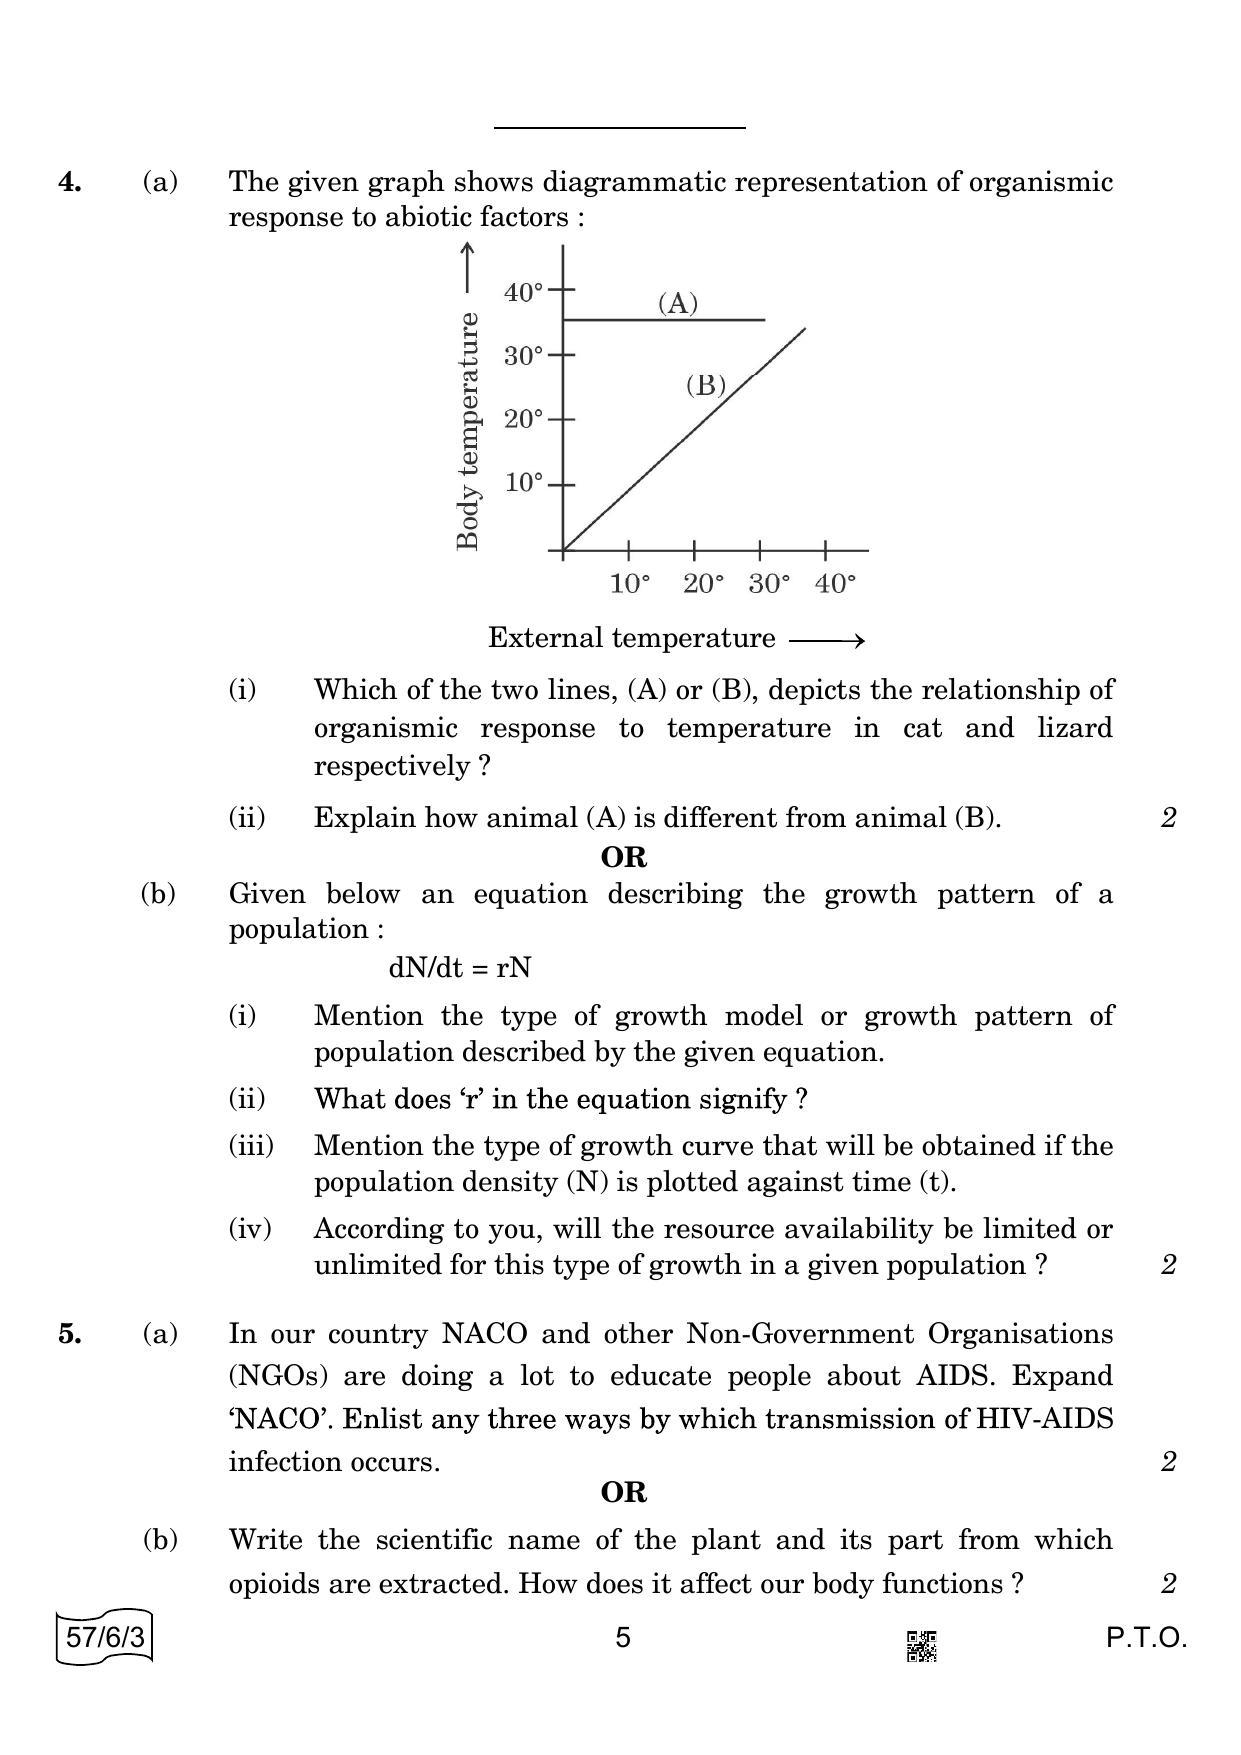 CBSE Class 12 57-6-3 BIOLOGY 2022 Compartment Question Paper - Page 5